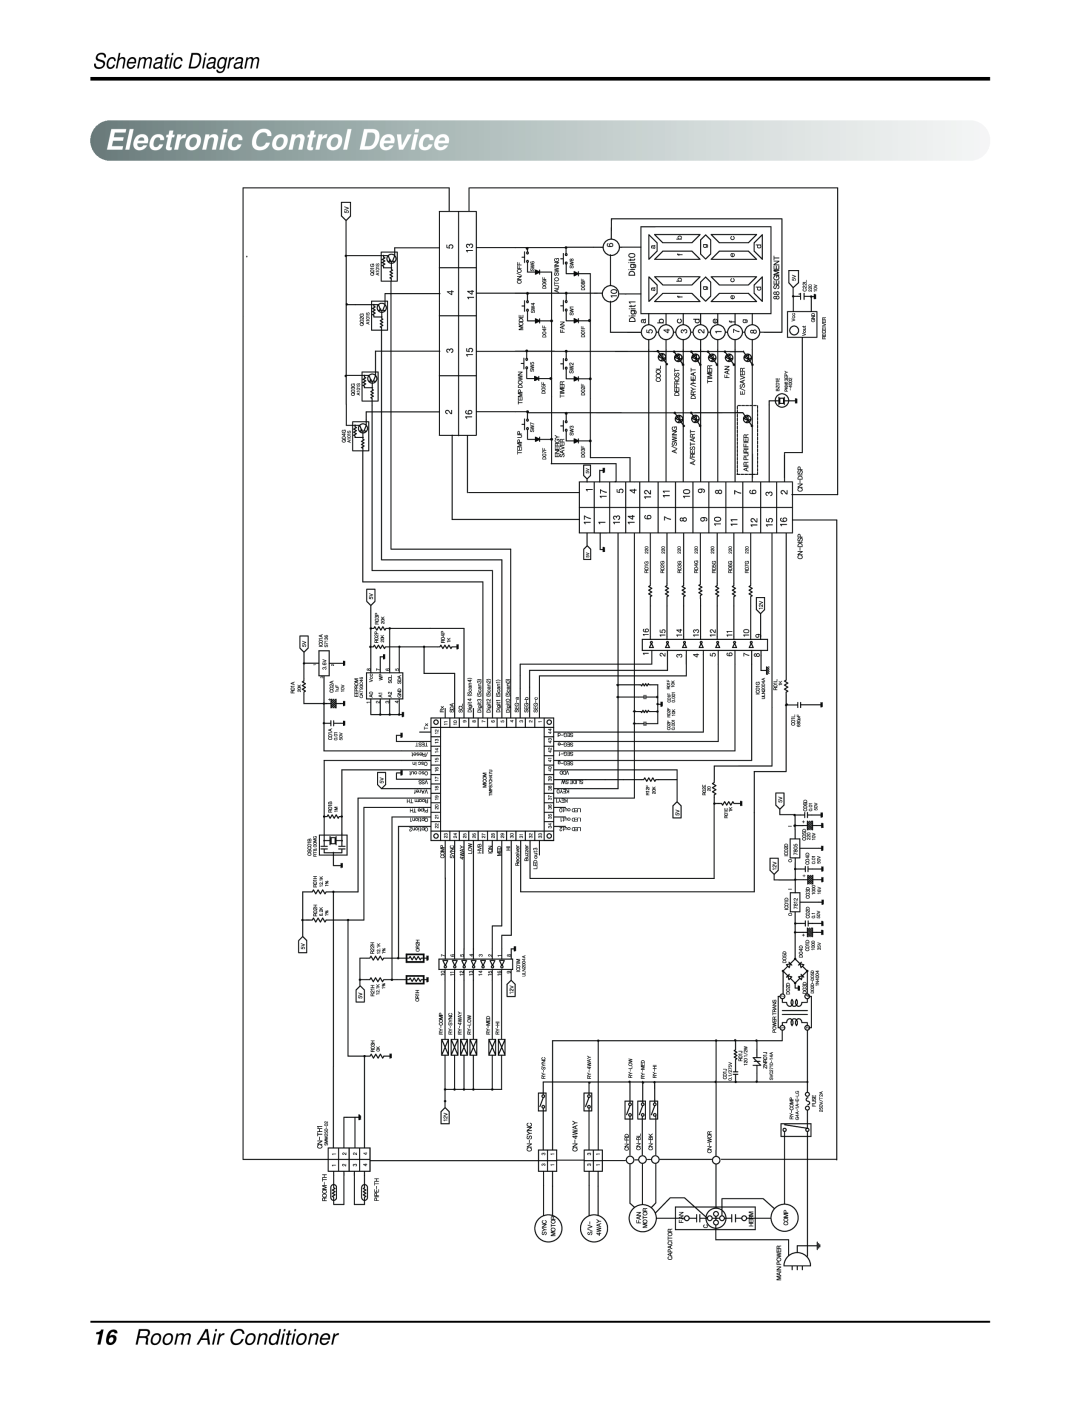 Friedrich CP12F10, CP10F10 manual ElectronicControl Device, 16Room Air Conditioner, Schematic Diagram 